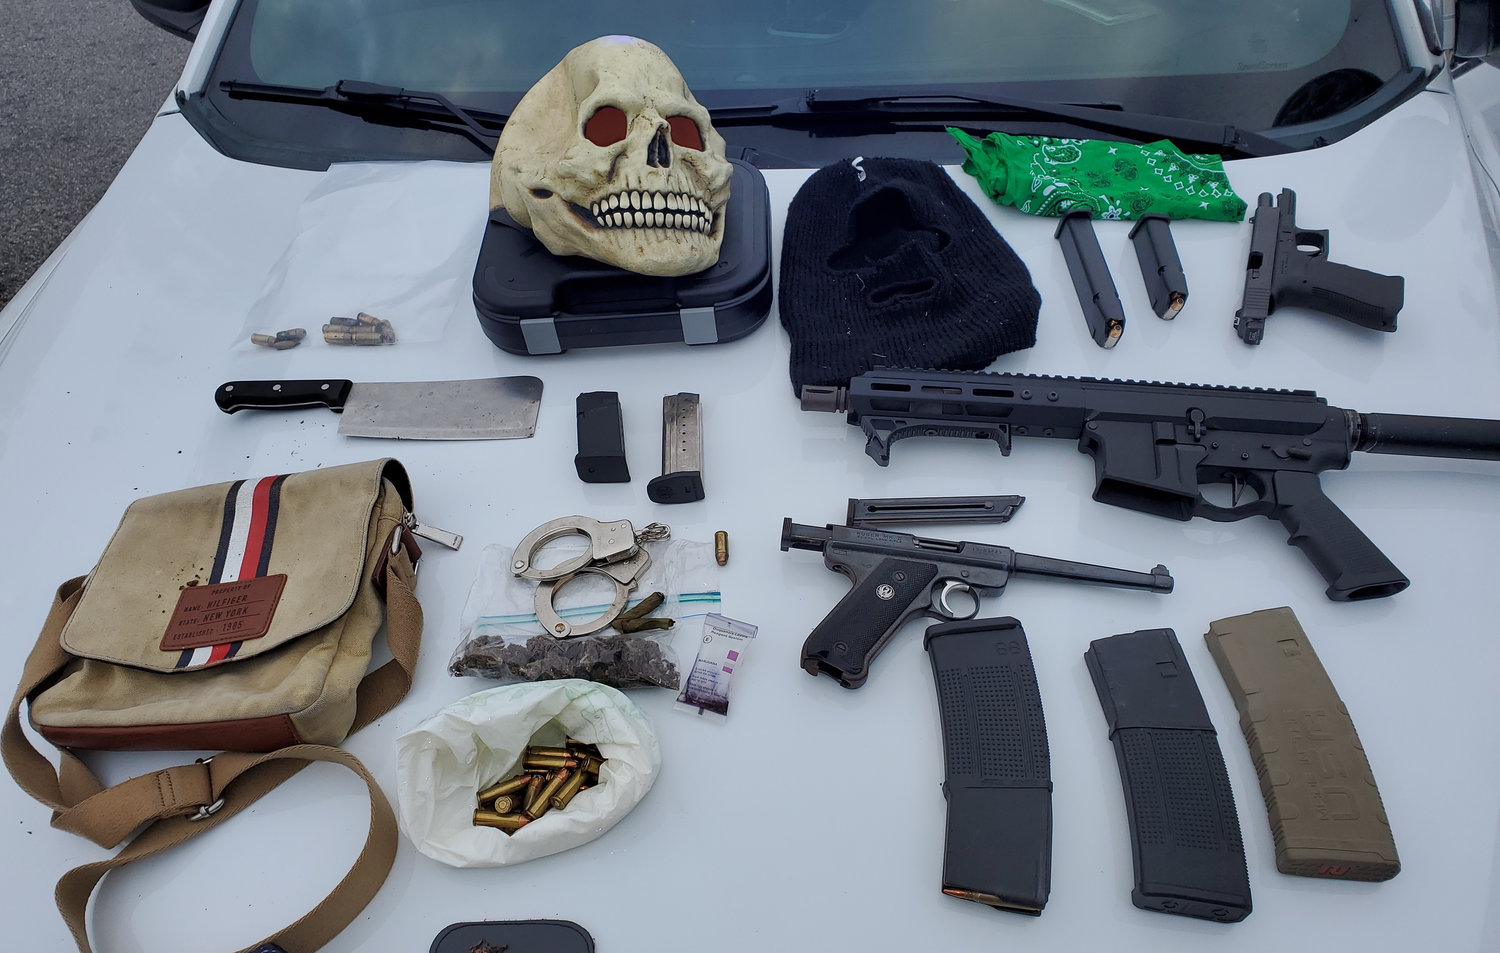 The masks, ammunition, guns, and drugs discovered by deputies